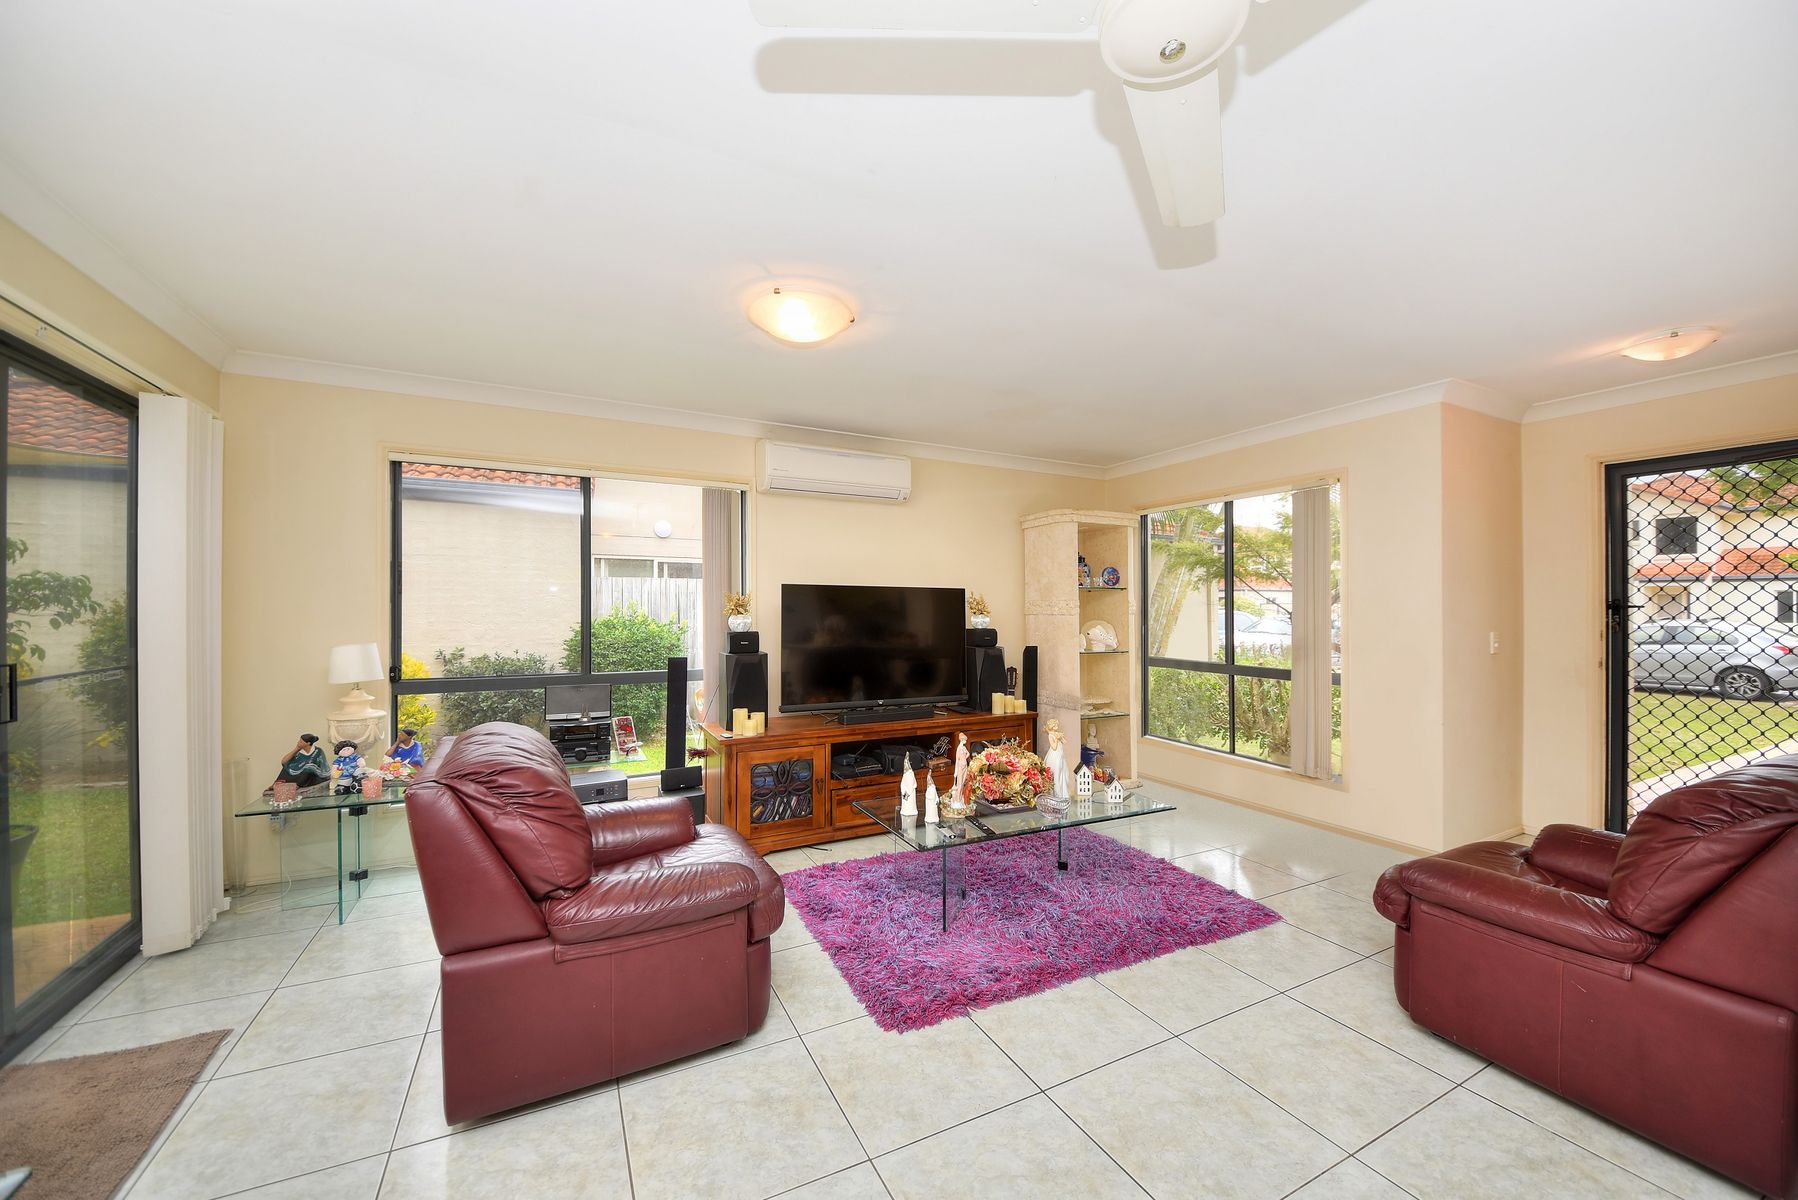 17 19 Yaun st Coomera Alessia Tang Area Specialist 1